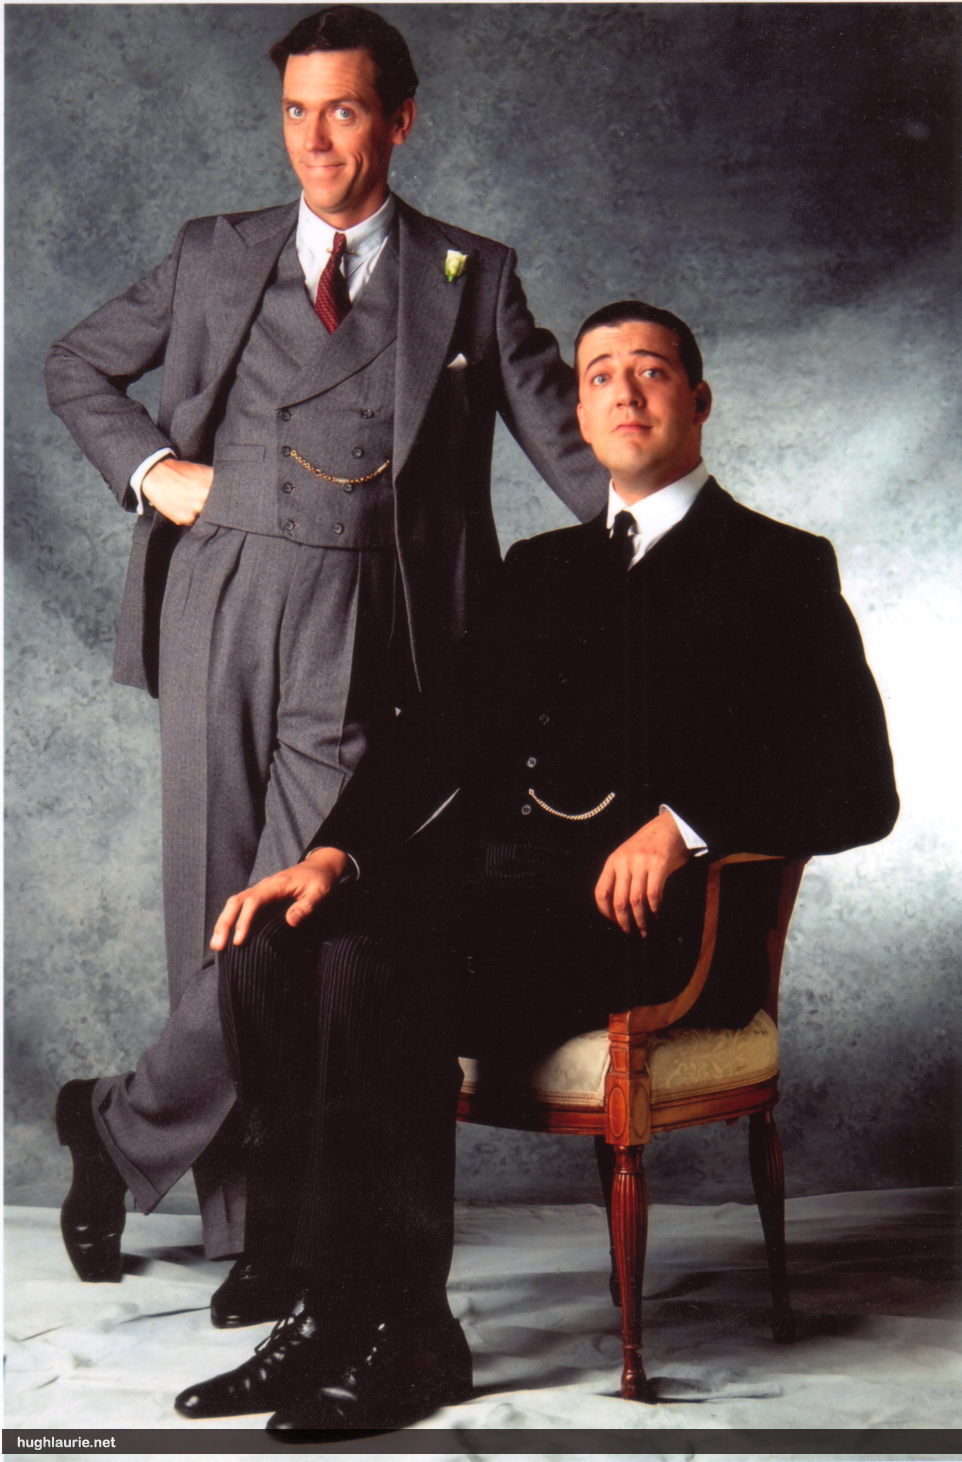 J-W-portrait-jeeves-and-wooster-461816_962_1462.jpg